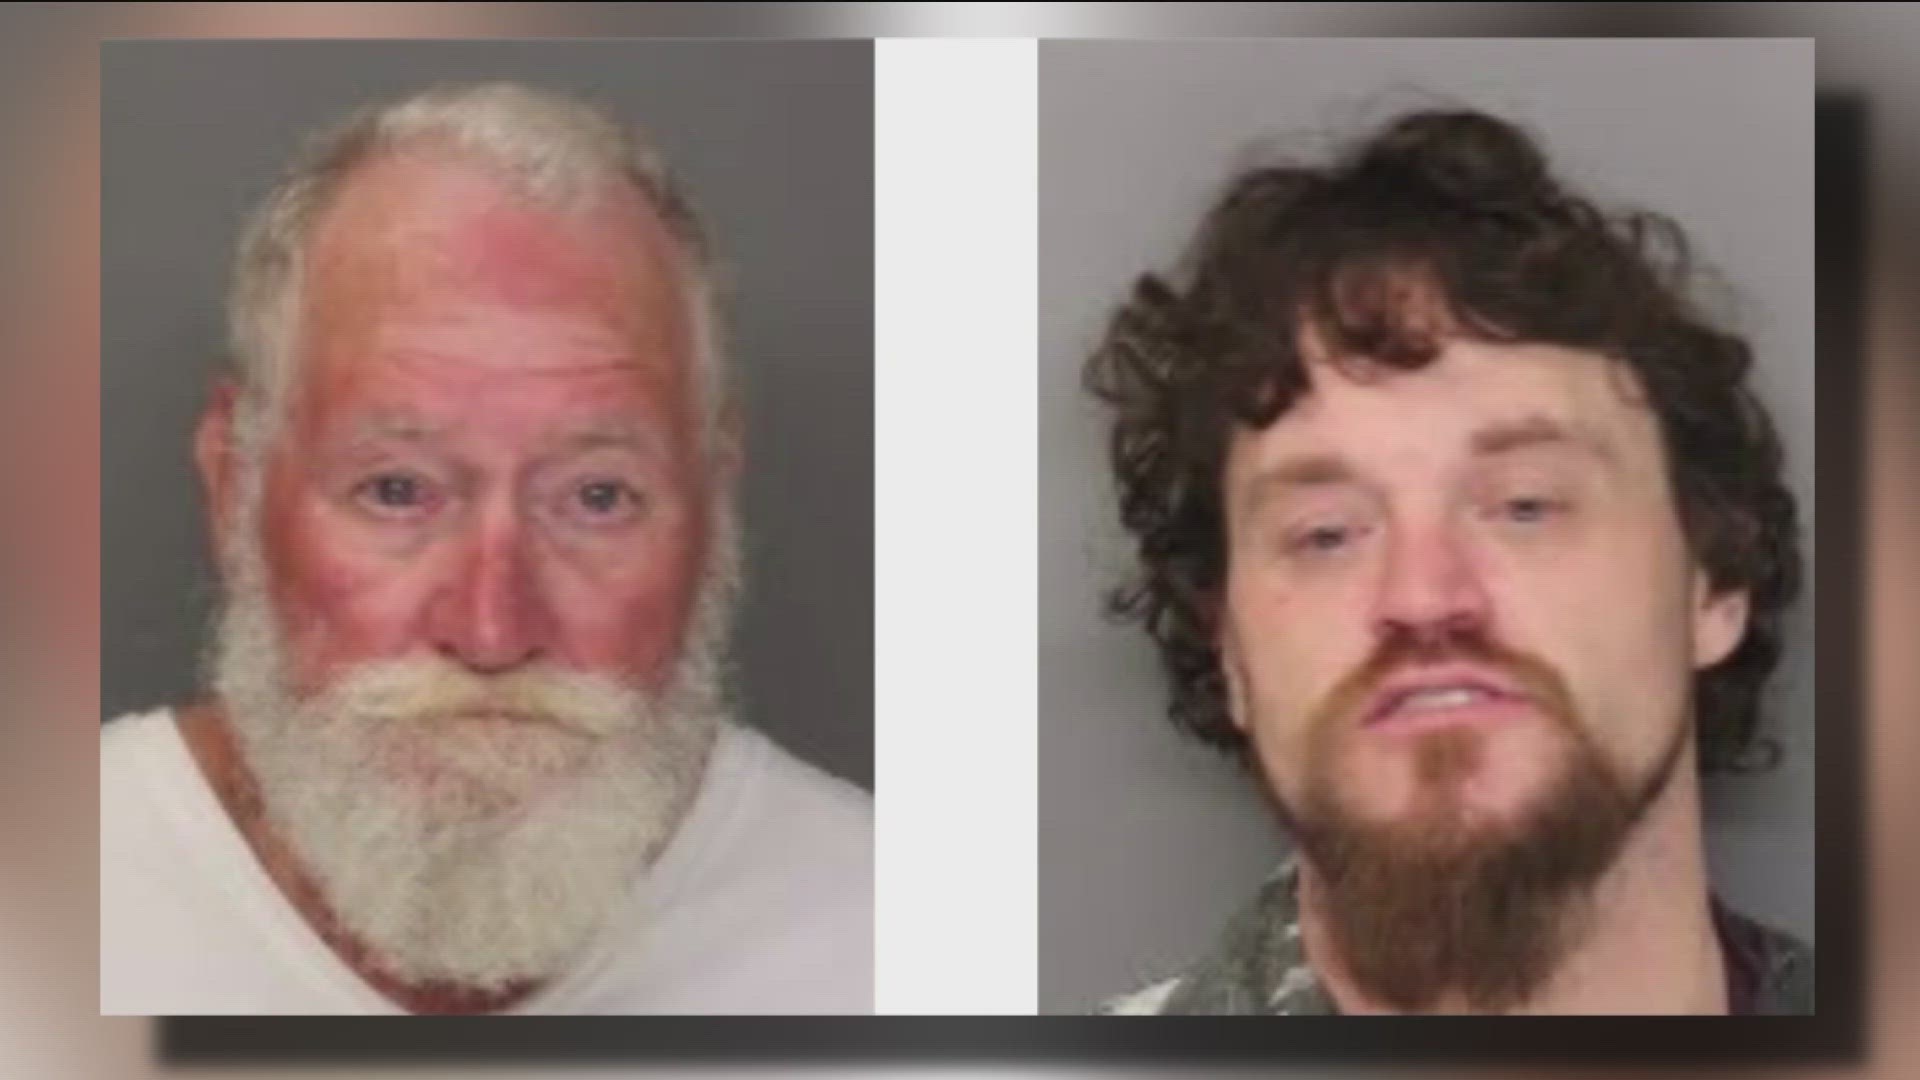 Both men were recently released from prison. They're accused of videotaping the sexual assault.